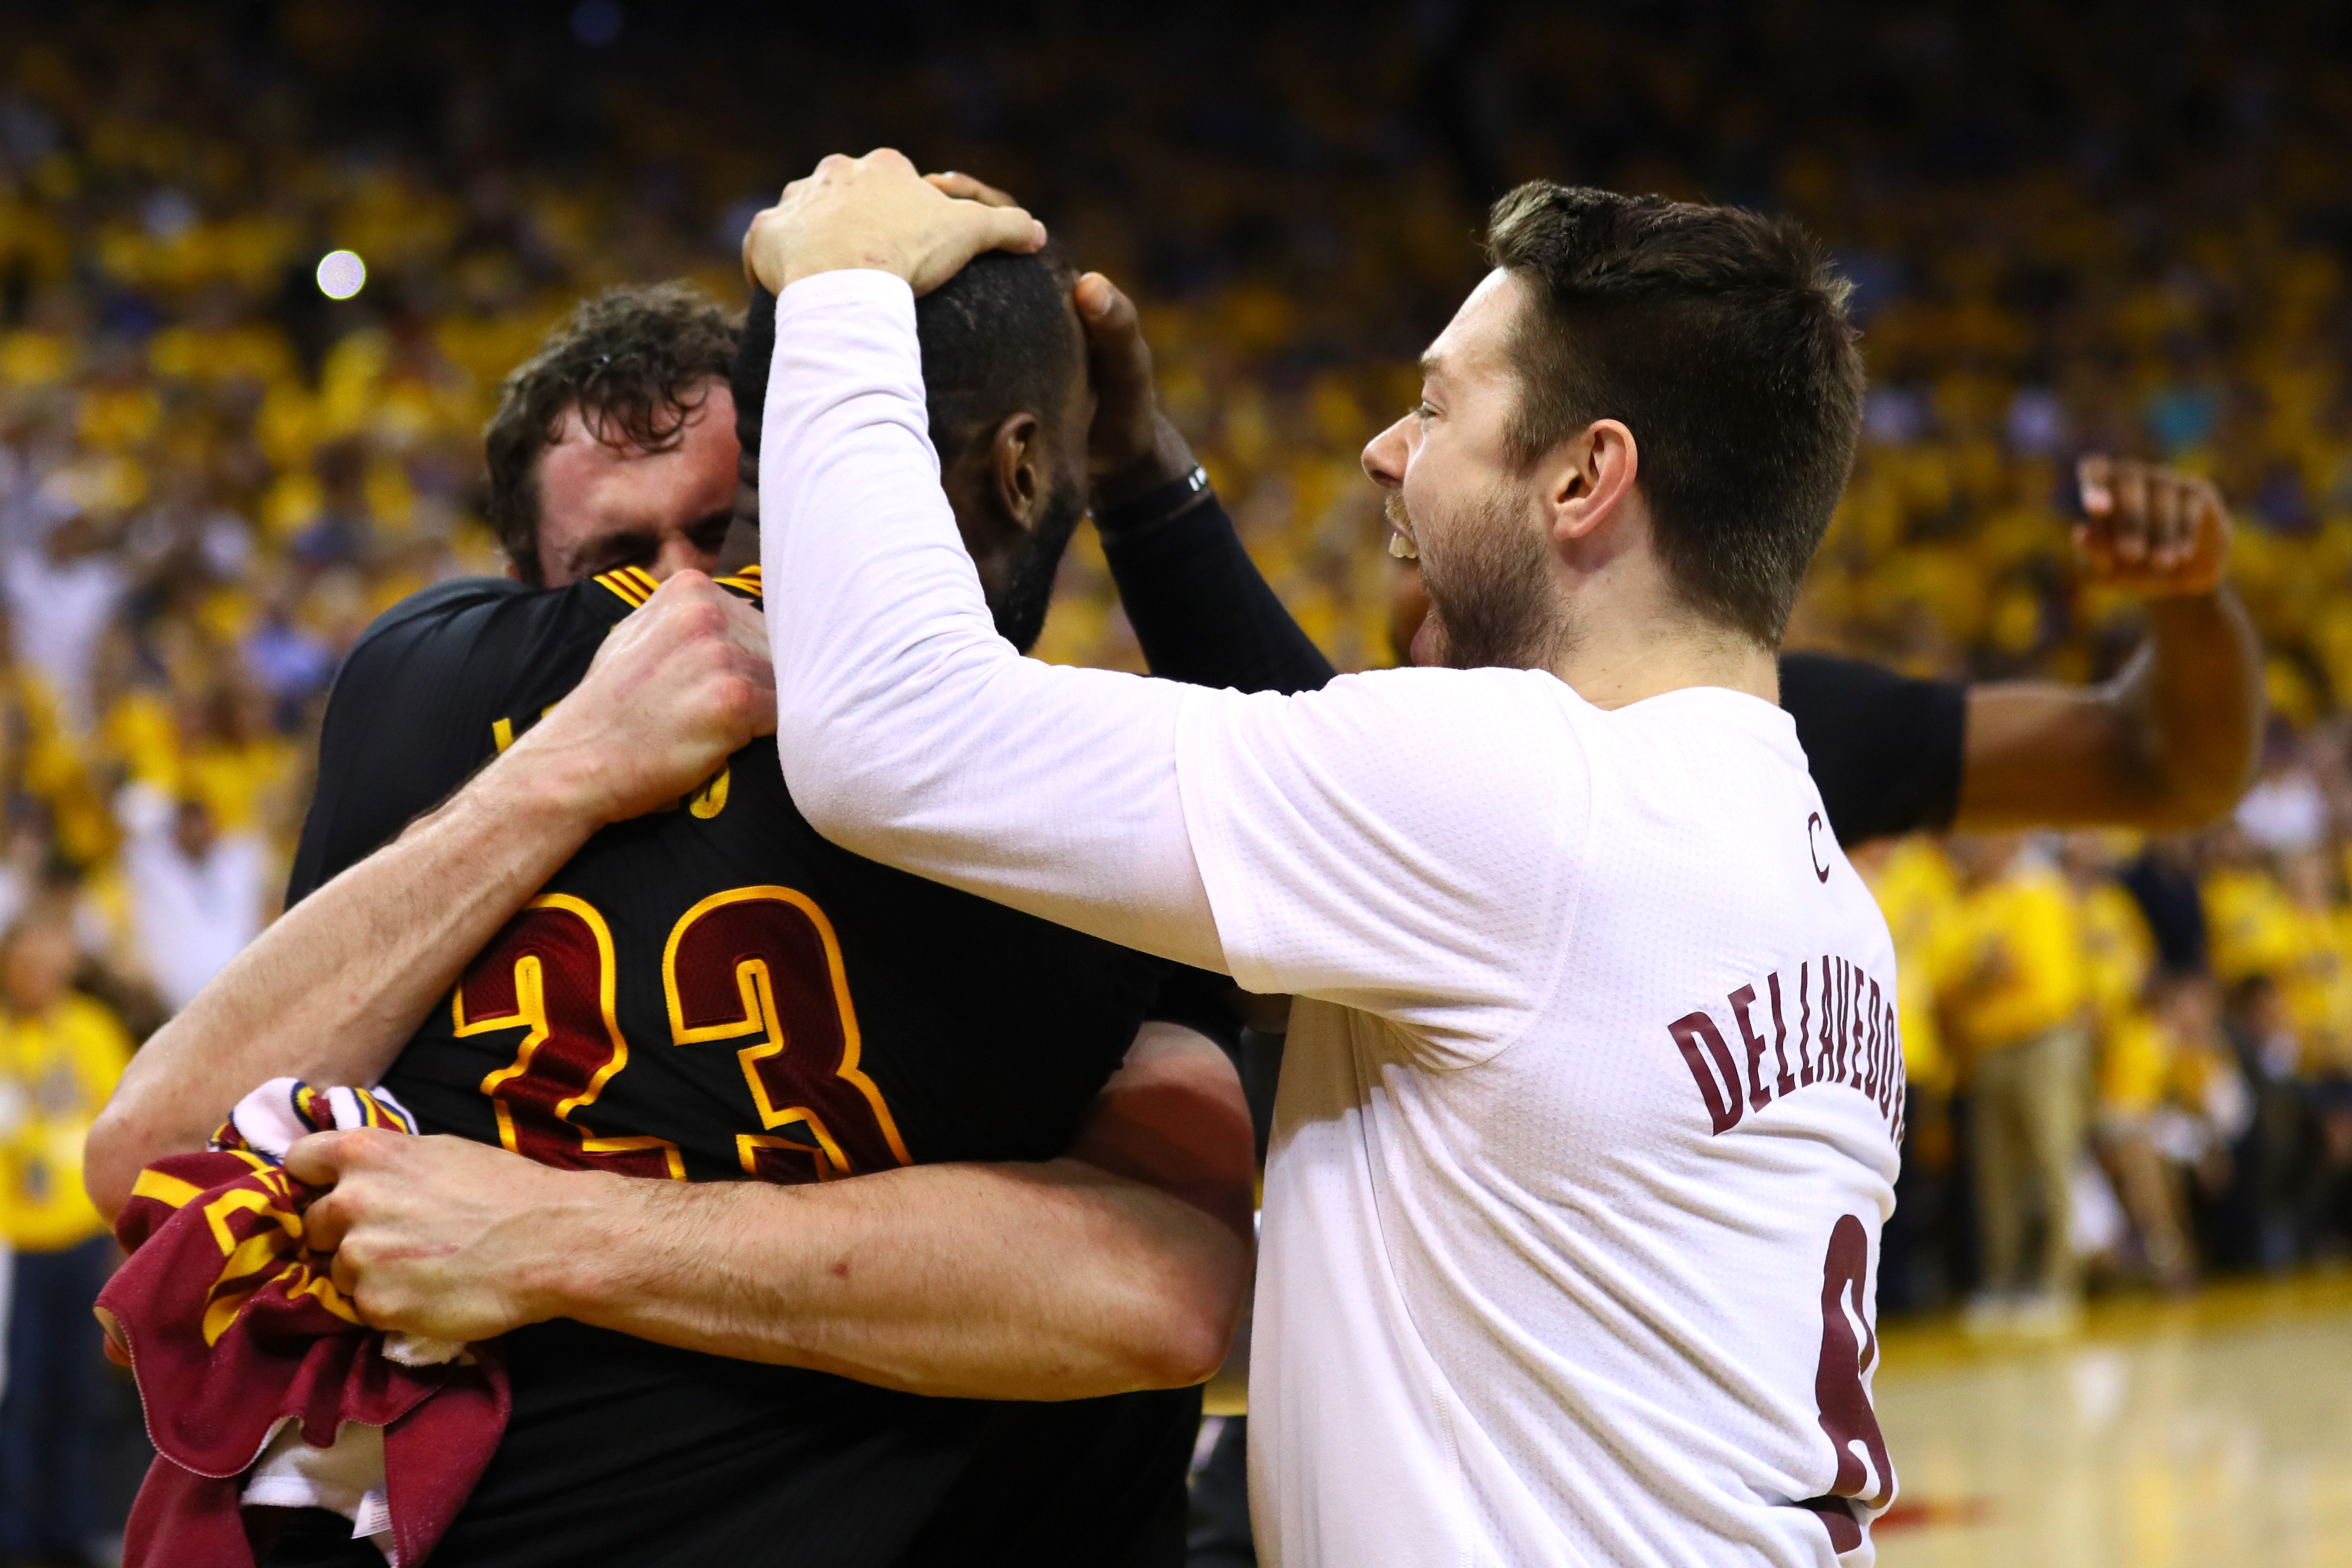 OAKLAND, CA - JUNE 19: LeBron James #23, Matthew Dellavedova #8 and Kevin Love #0 of the Cleveland Cavaliers celebrate after defeating the Golden State Warriors 93-89 in Game 7 of the 2016 NBA Finals at ORACLE Arena on June 19, 2016 in Oakland, California. NOTE TO USER: User expressly acknowledges and agrees that, by downloading and or using this photograph, User is consenting to the terms and conditions of the Getty Images License Agreement.   Ezra Shaw/Getty Images/AFP